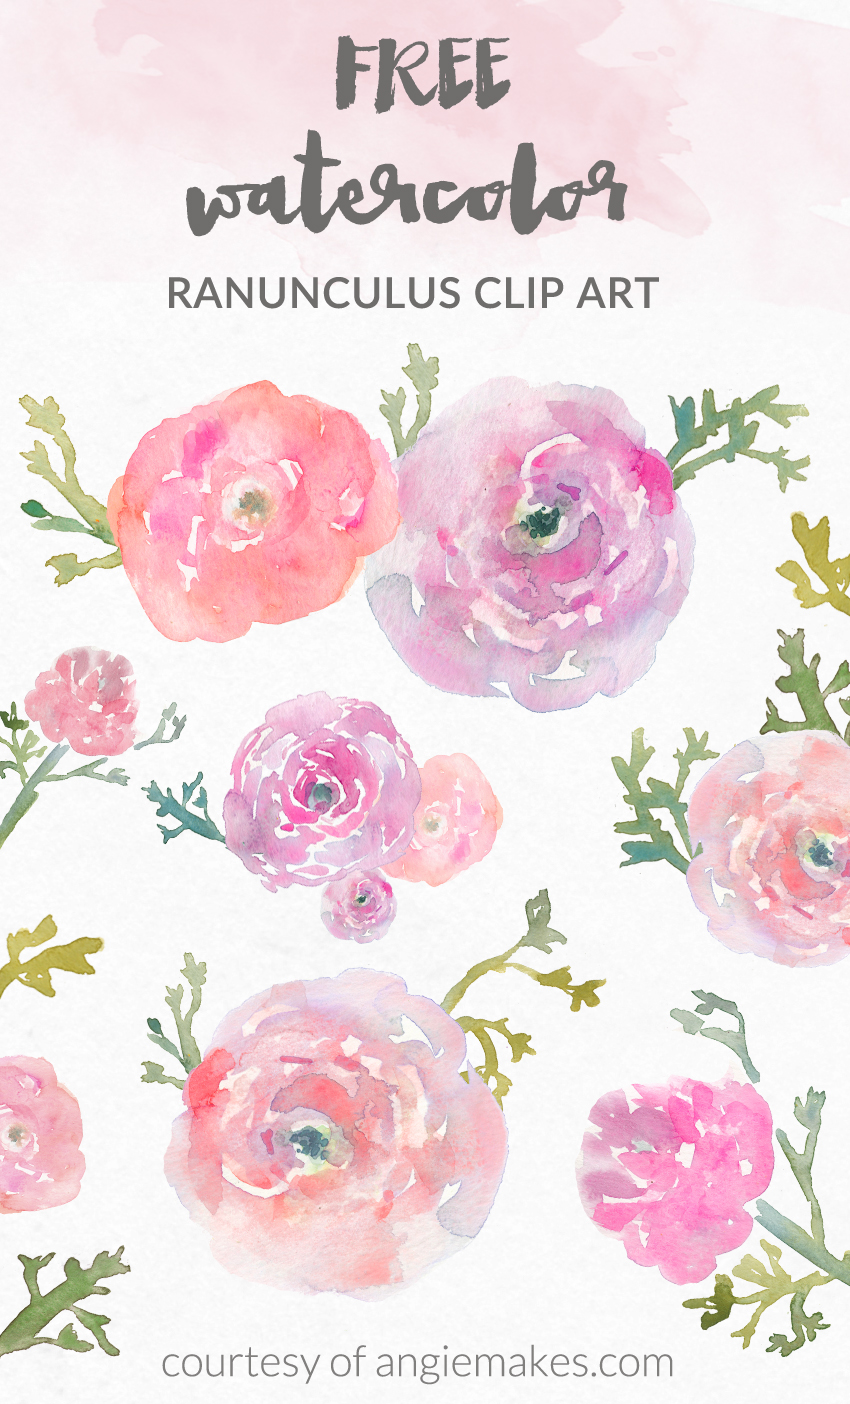 free watercolor clipart images - photo #3